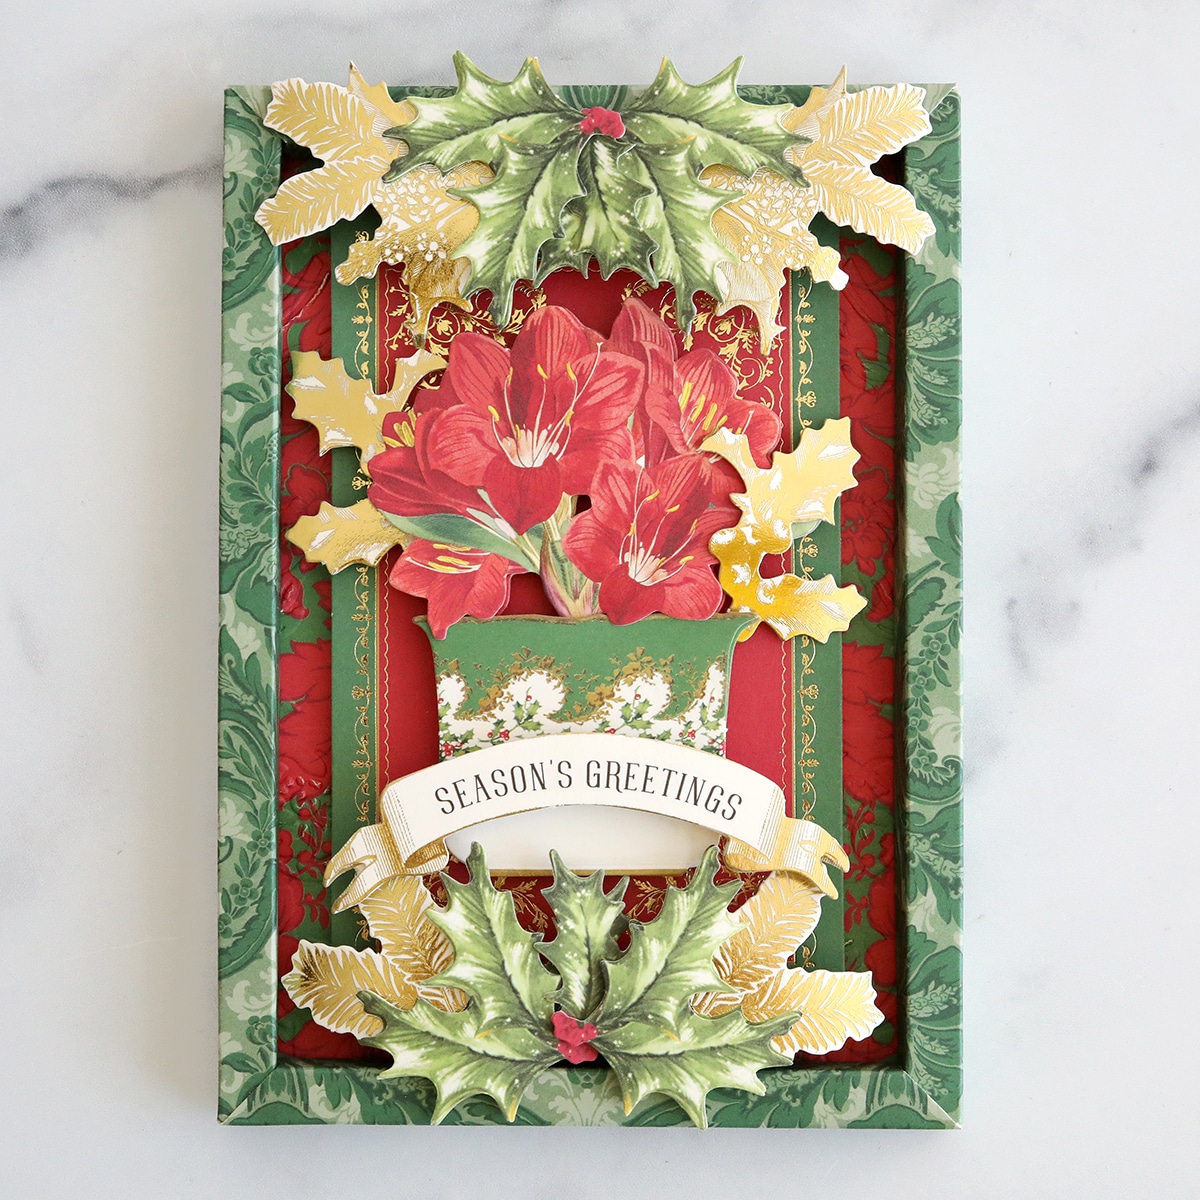 A christmas card with holly leaves and holly berries.